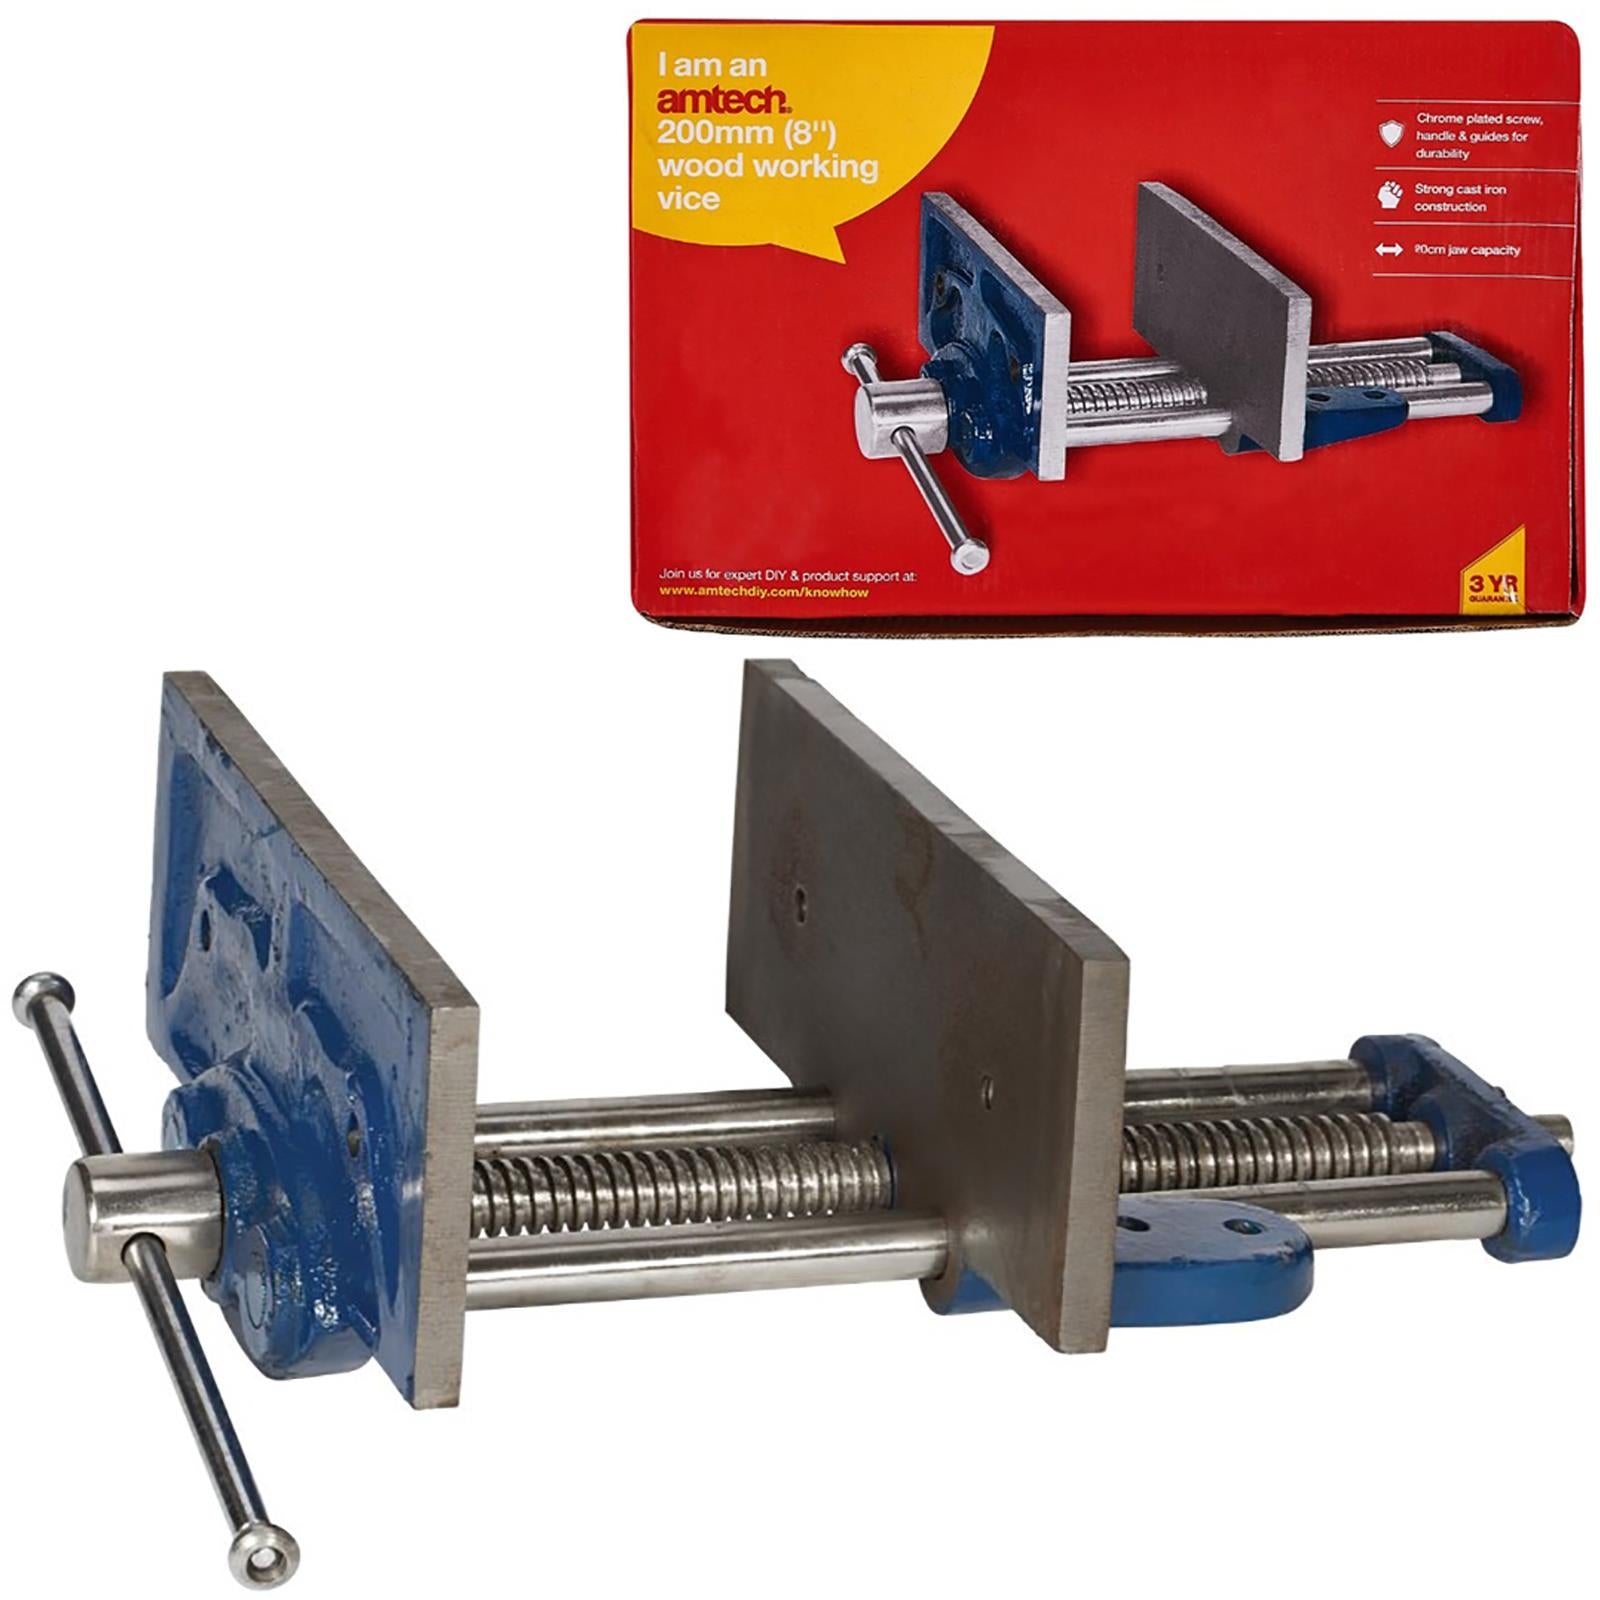 Amtech Bench Vice Clamp Woodworking Carpenters Workshop Table 200mm 8